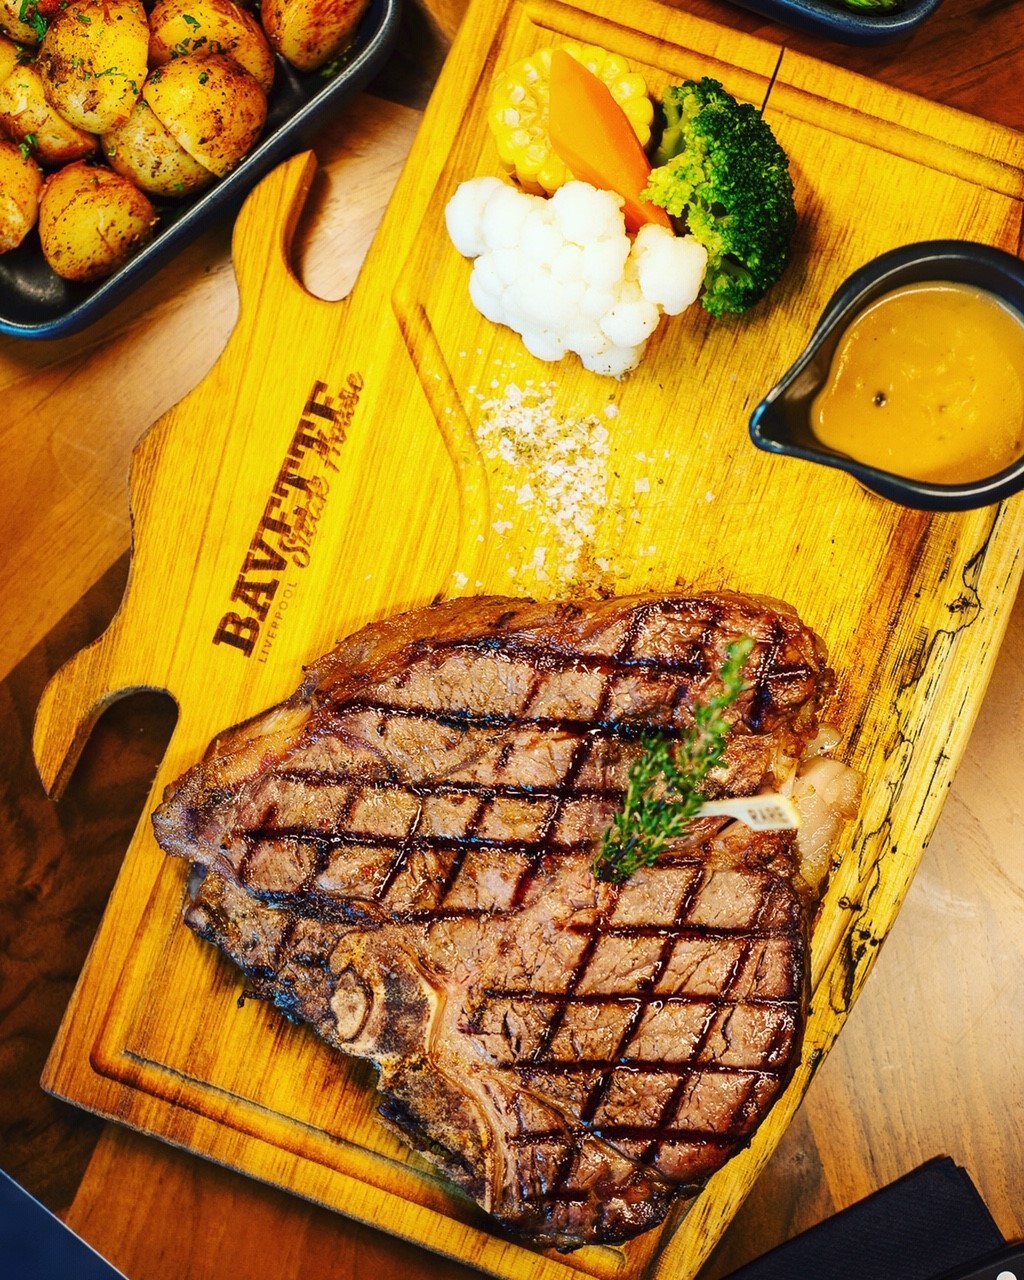 Bavette are specialists in steak